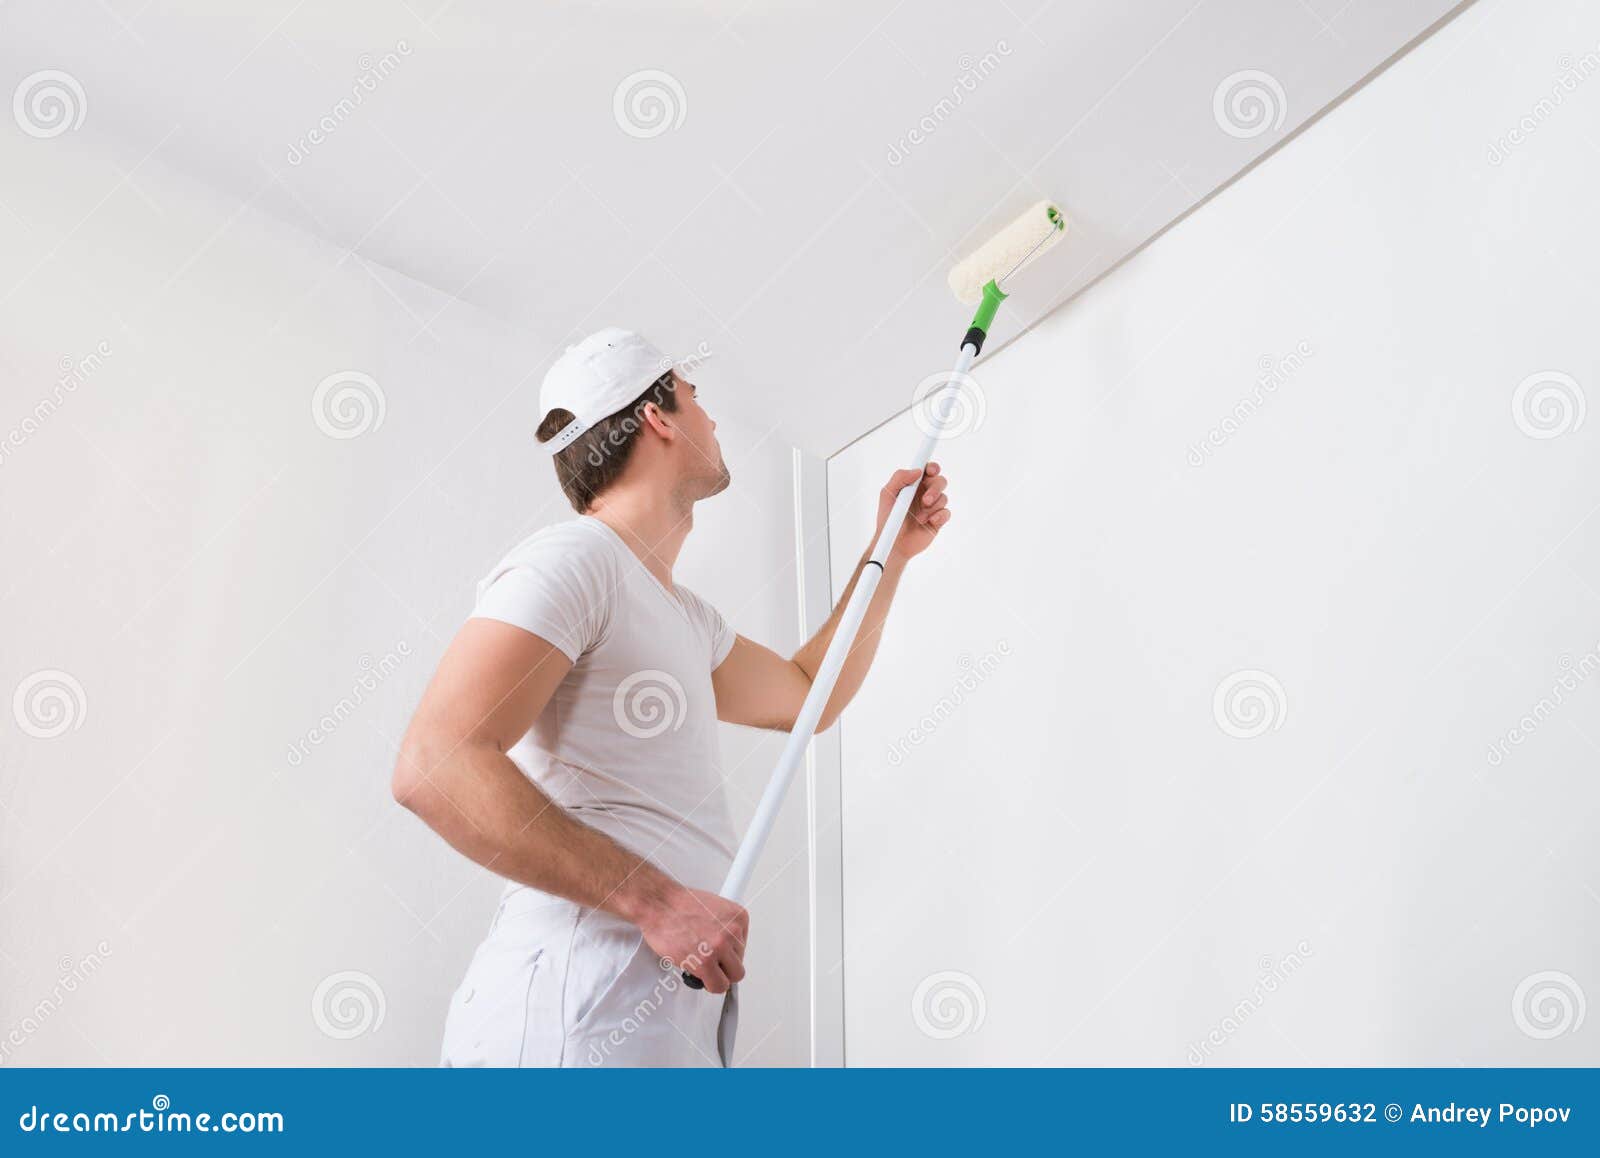 painter painting on wall